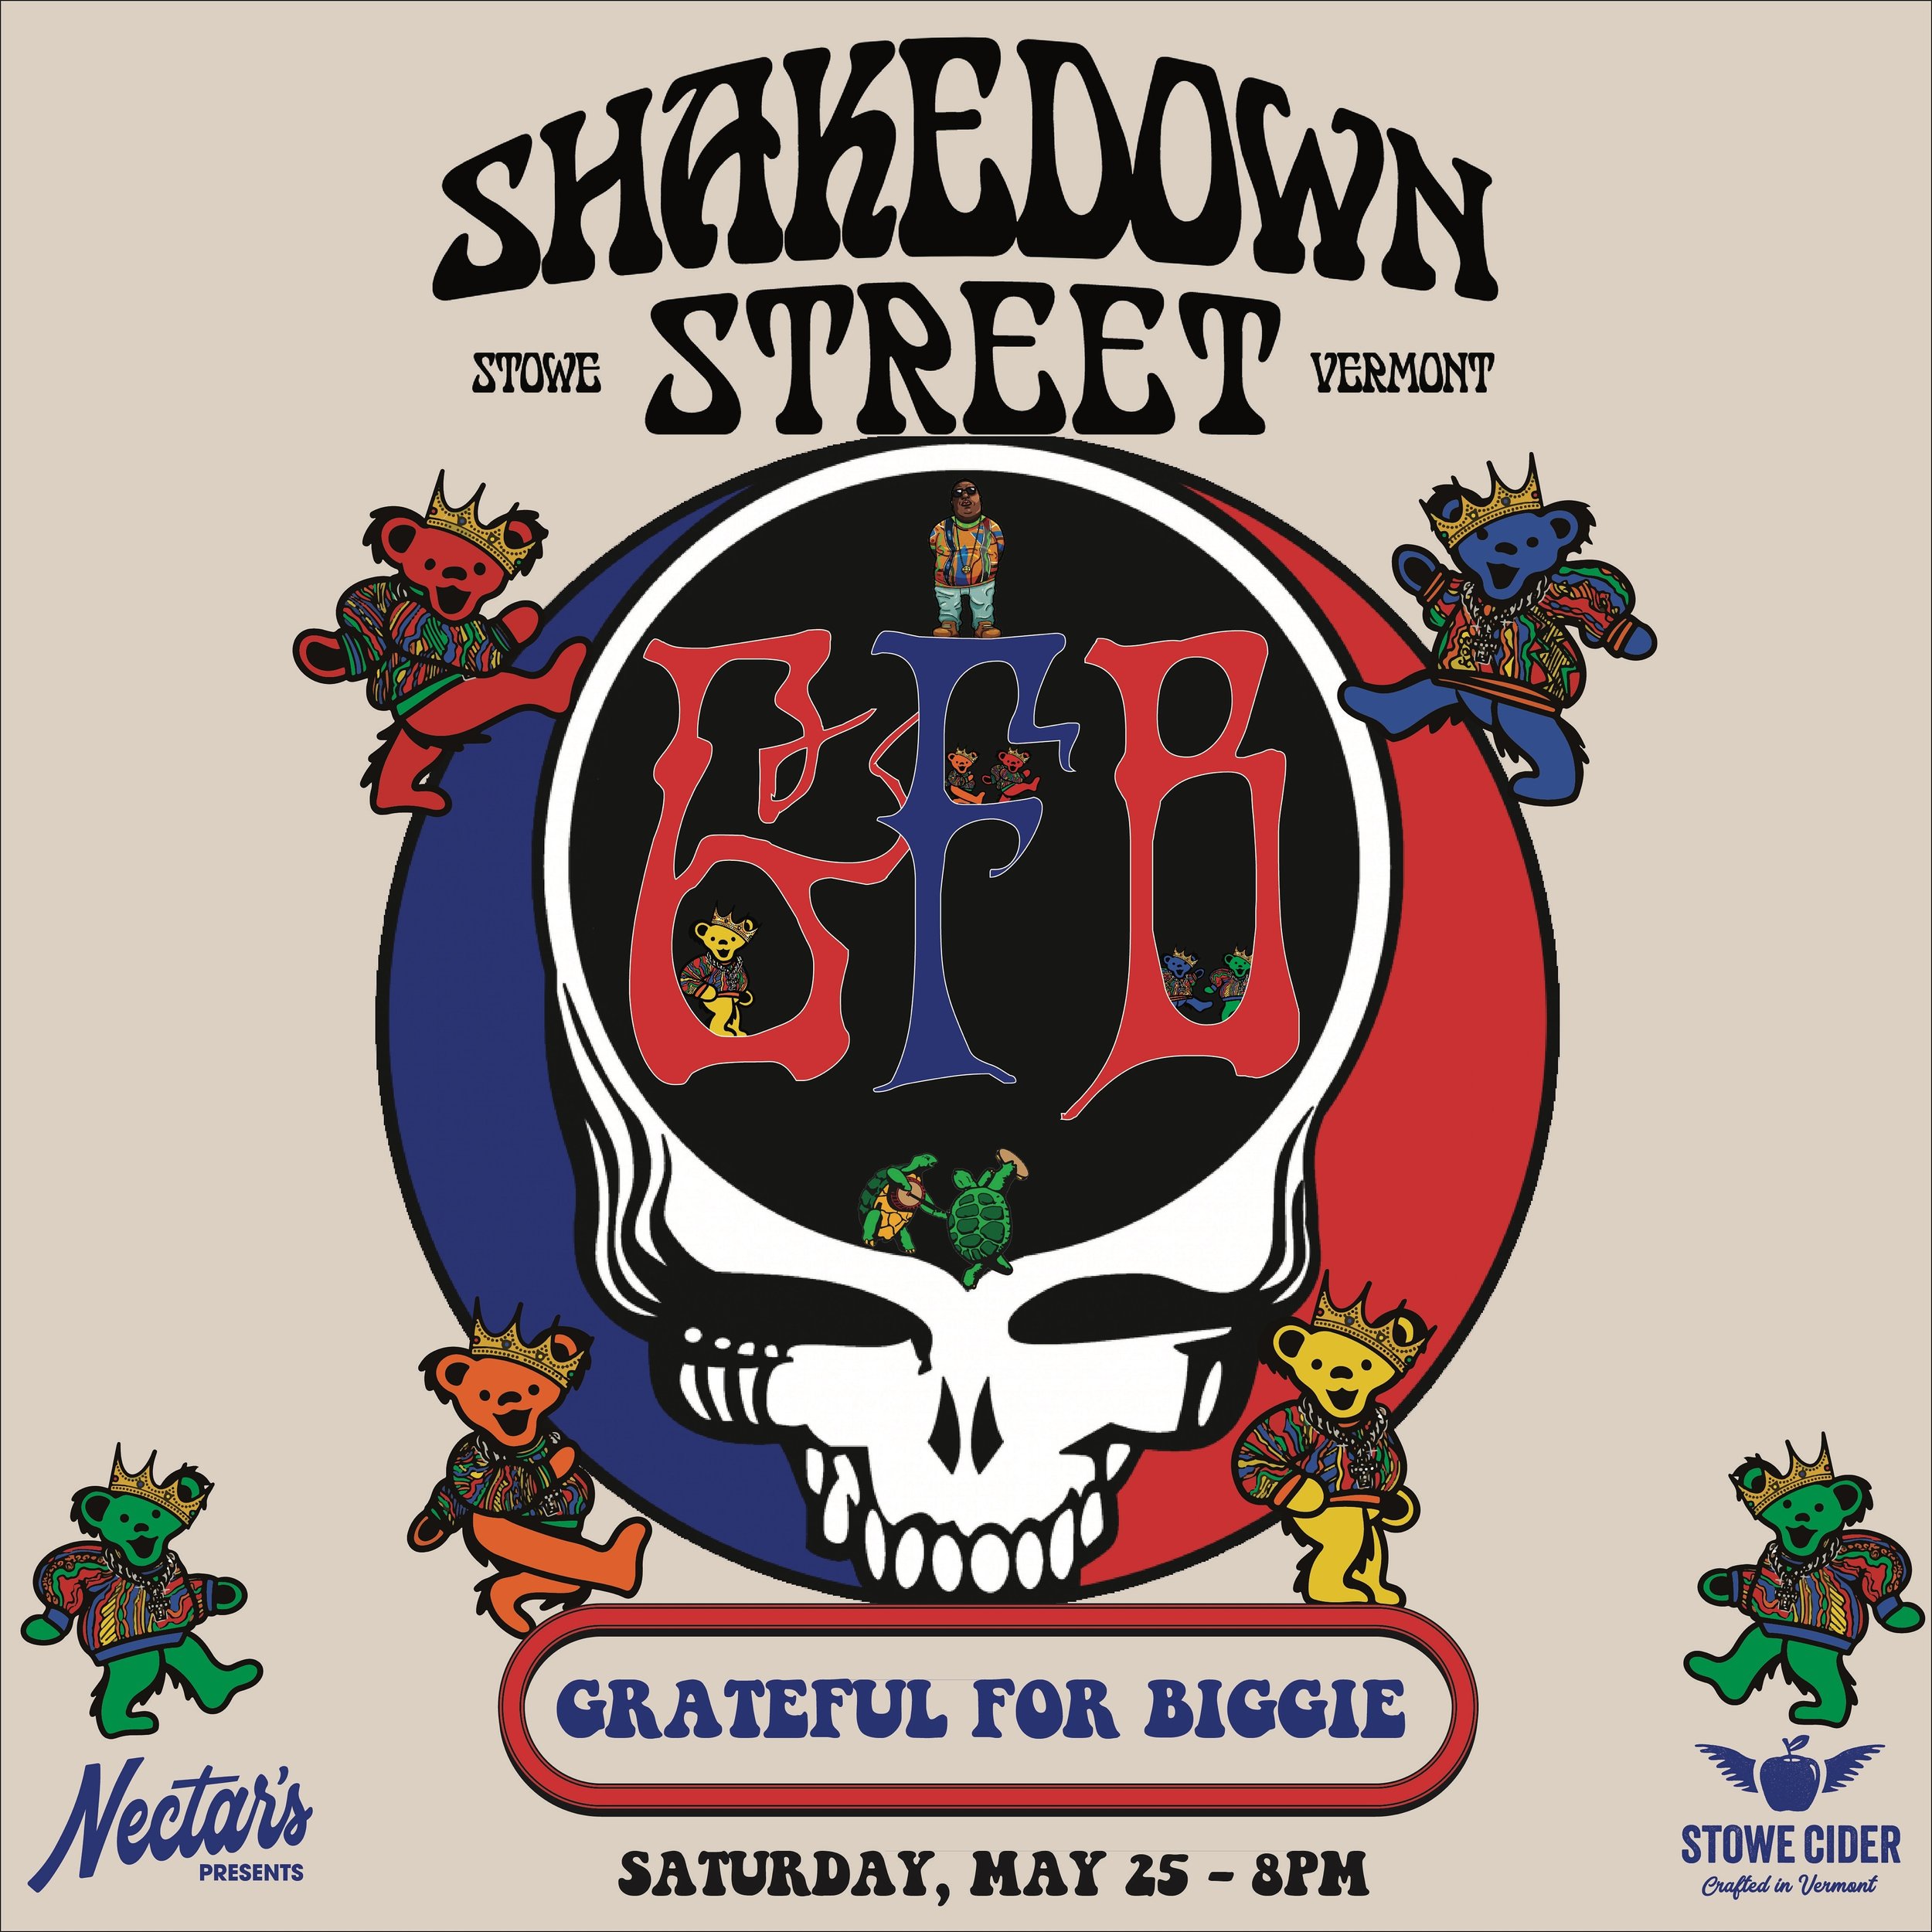 We&rsquo;re stoked to welcome @grateful4biggie to the Shakedown Lounge at @stowecider on Friday, May 25th at 8PM 🎶

Grateful Vibes 🤝 Hip Hop Flow

Grateful for Biggie is the ultimate mashup tribute that seamlessly blends the Grateful Dead&rsquo;s s